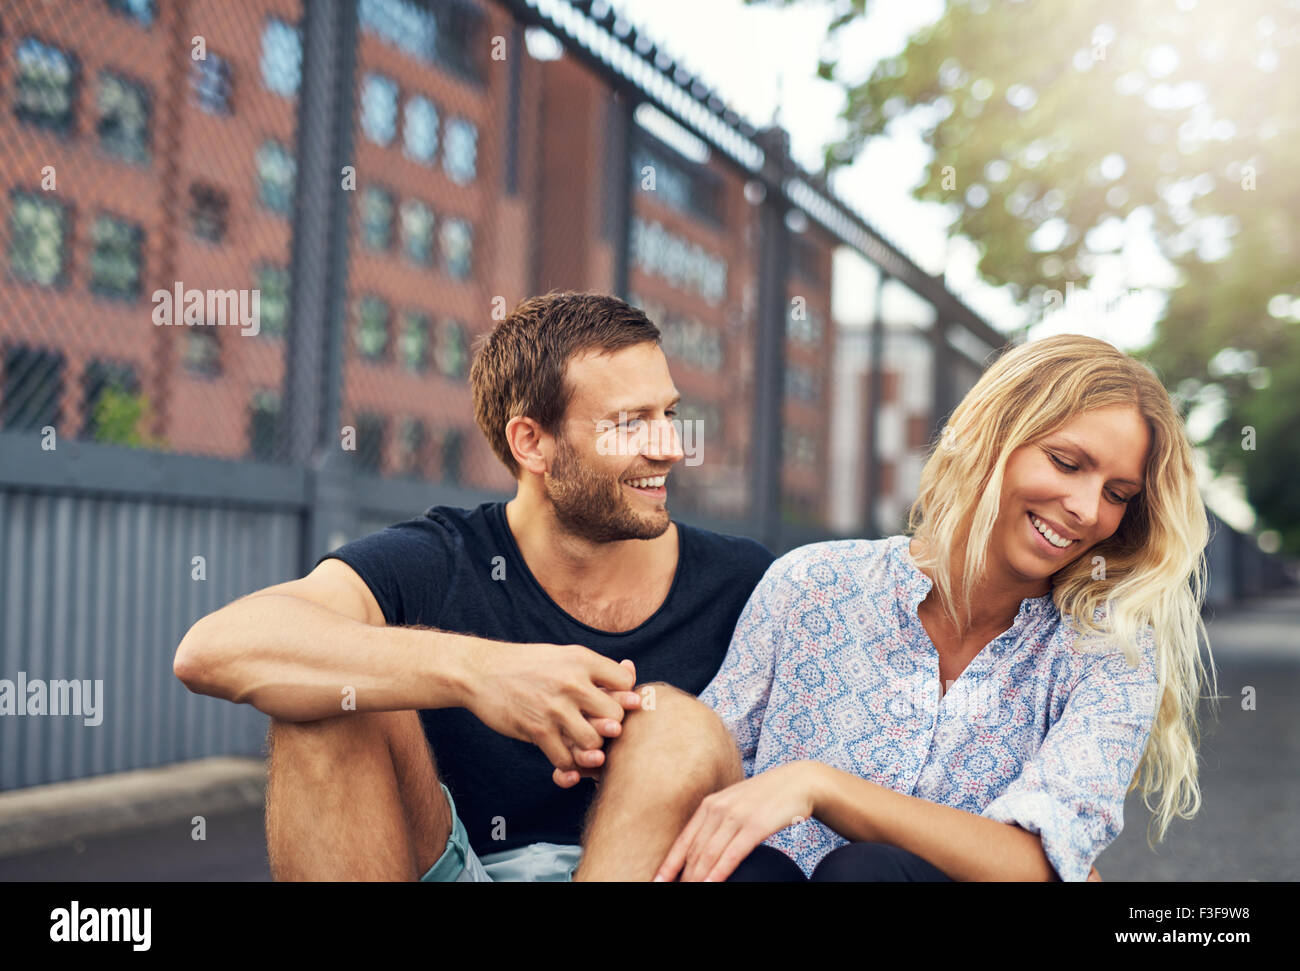 Man teasing his girlfriend, big city couple in a park Stock Photo